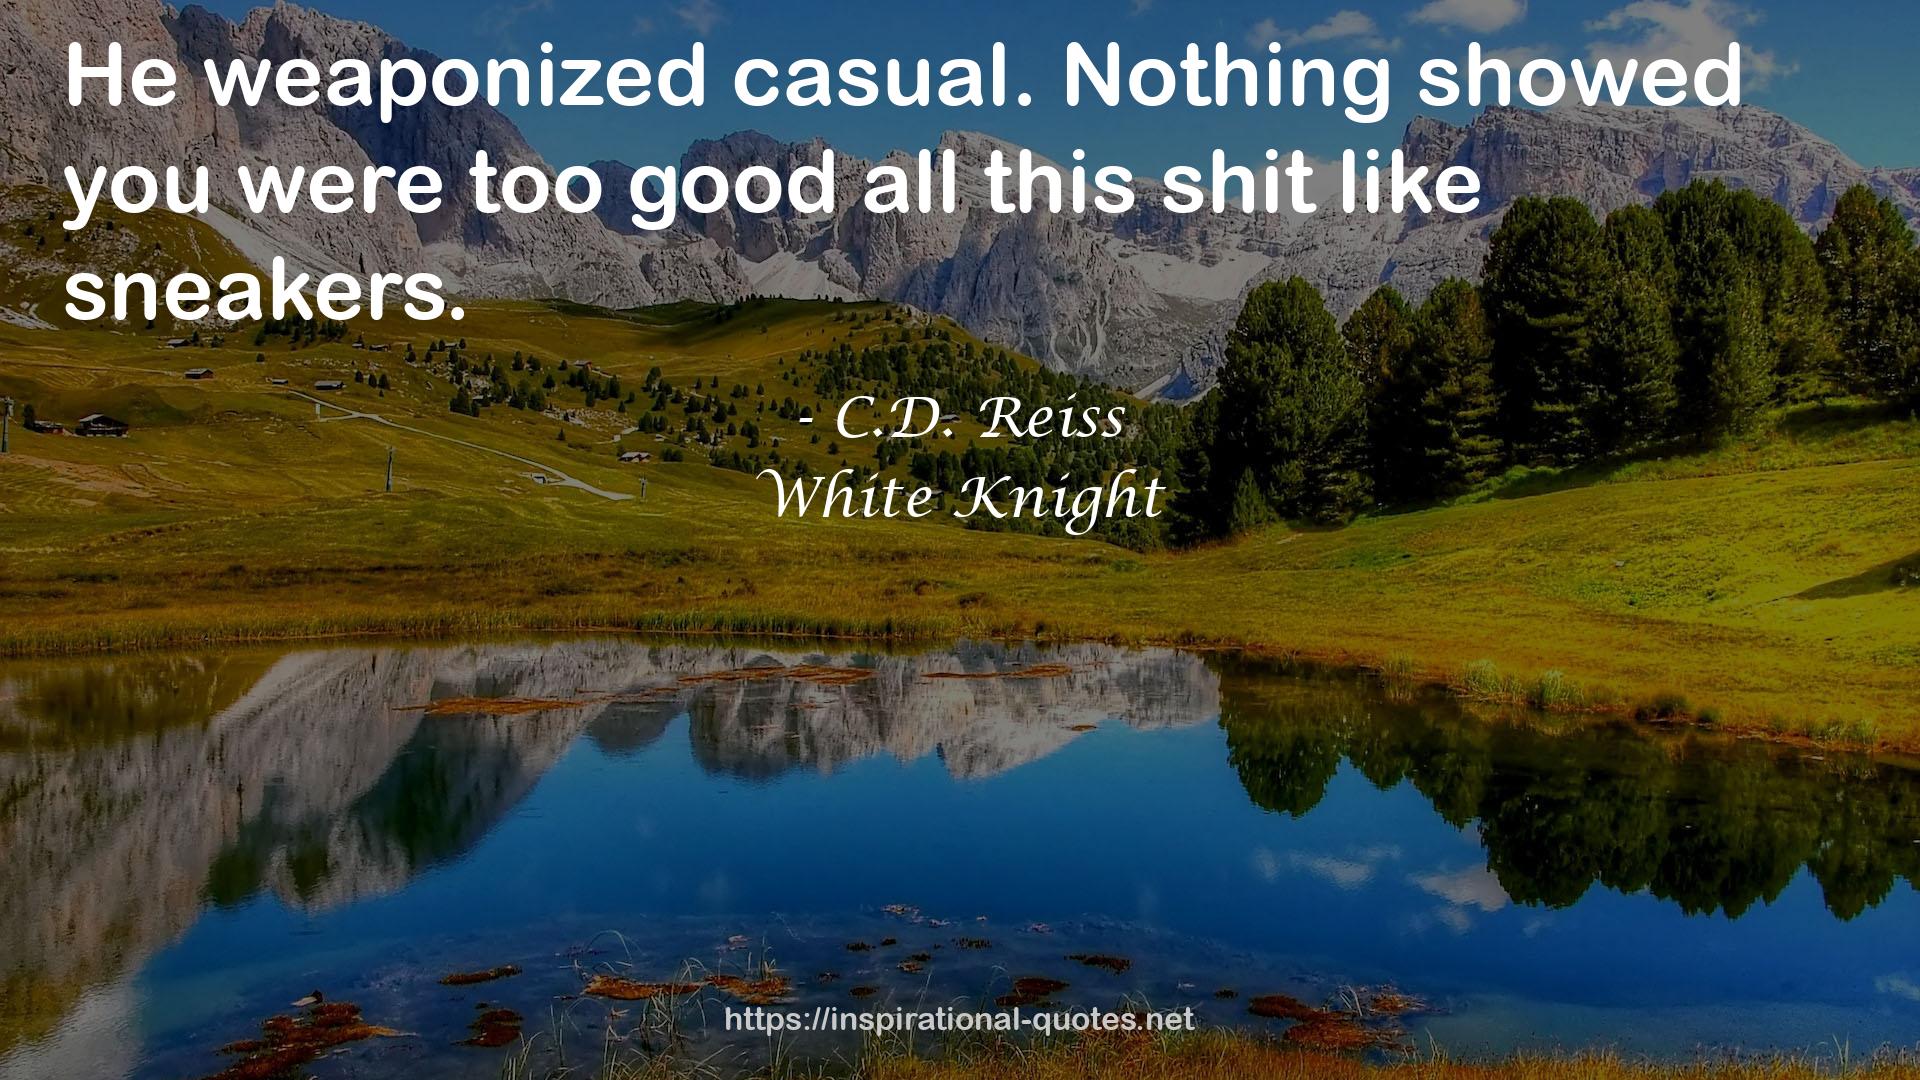 White Knight QUOTES